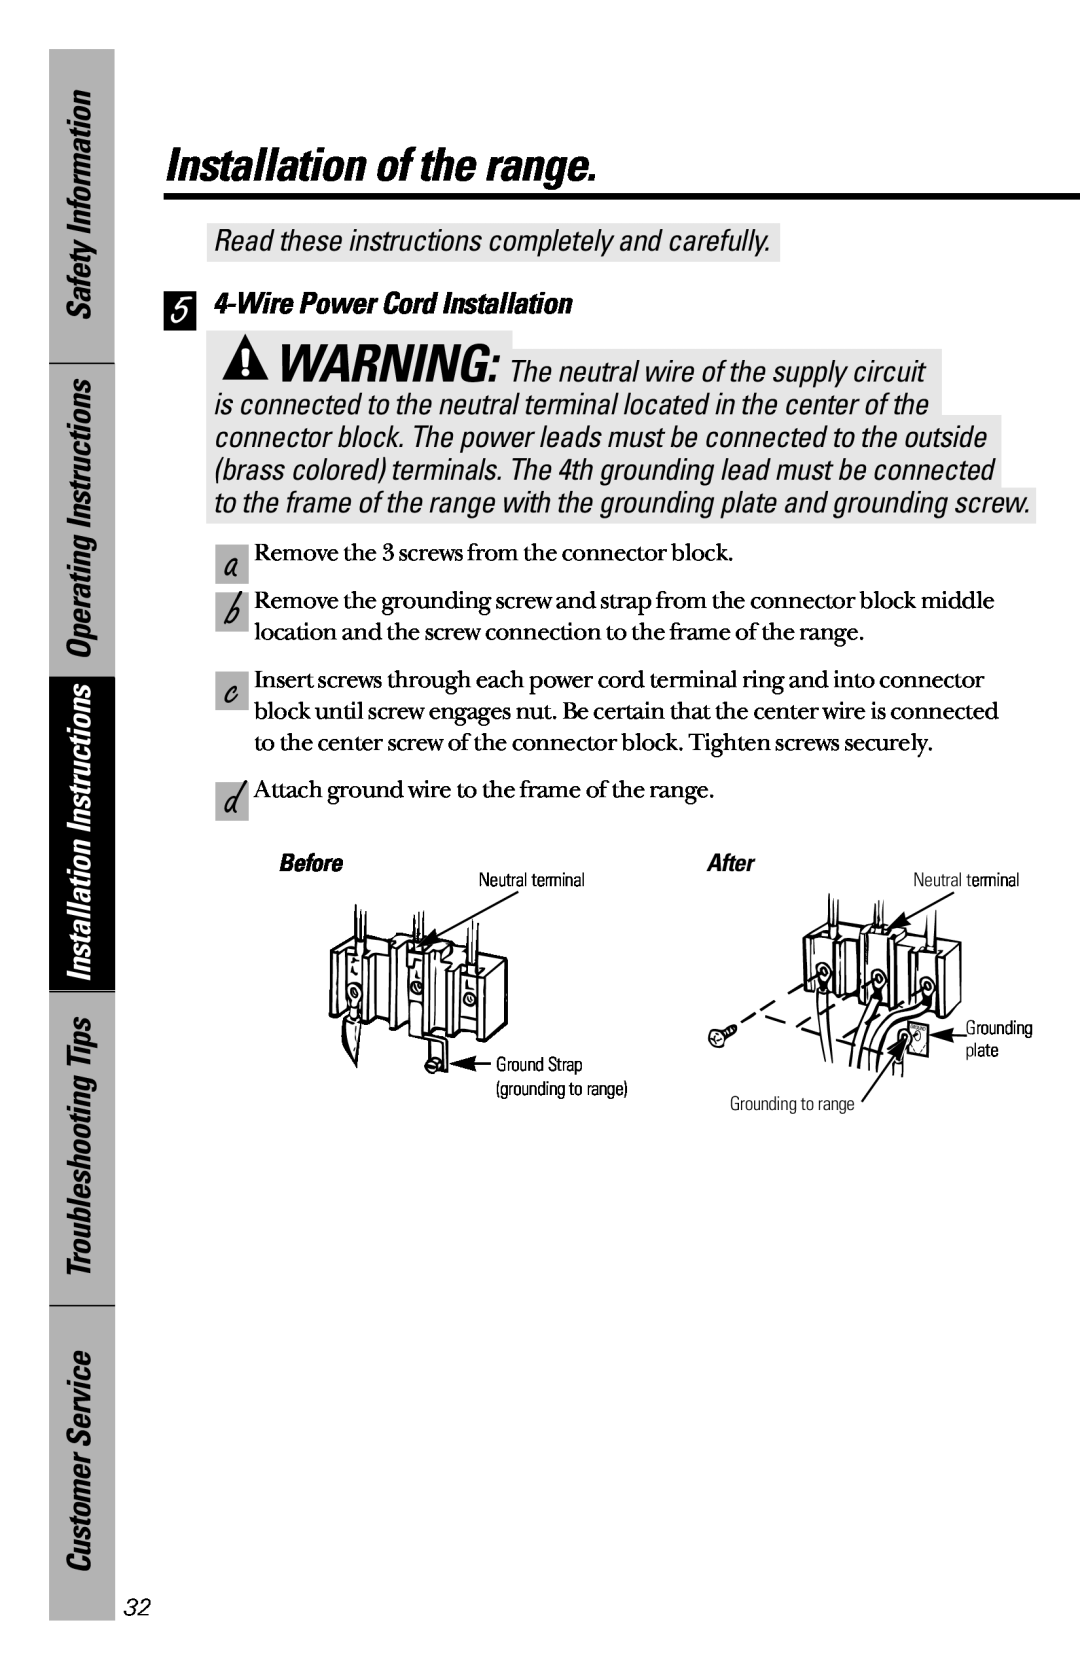 GE JBC27 5 4-Wire Power Cord Installation, Installation of the range, Read these instructions completely and carefully 